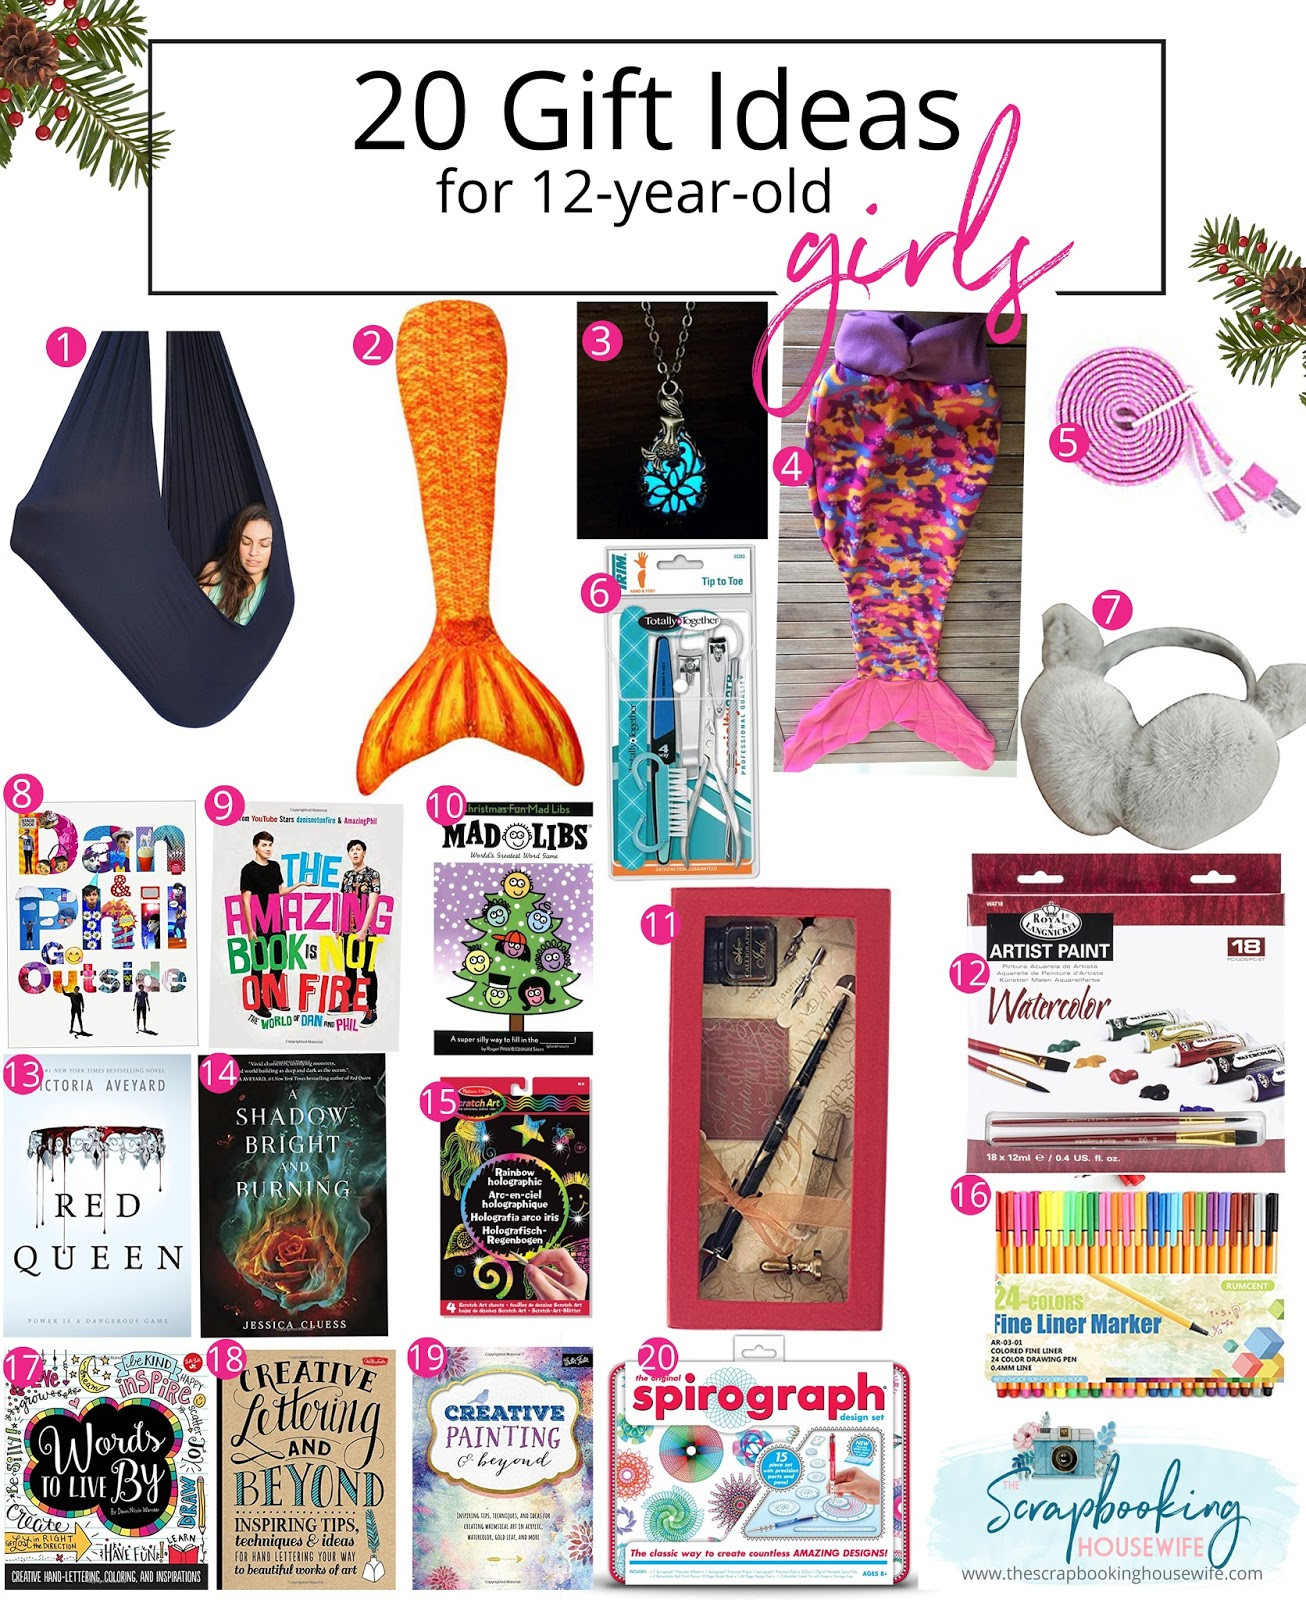 12 Year Old Christmas Gift Ideas
 Ellabella Designs 13 GIFT IDEAS FOR TODDLERS